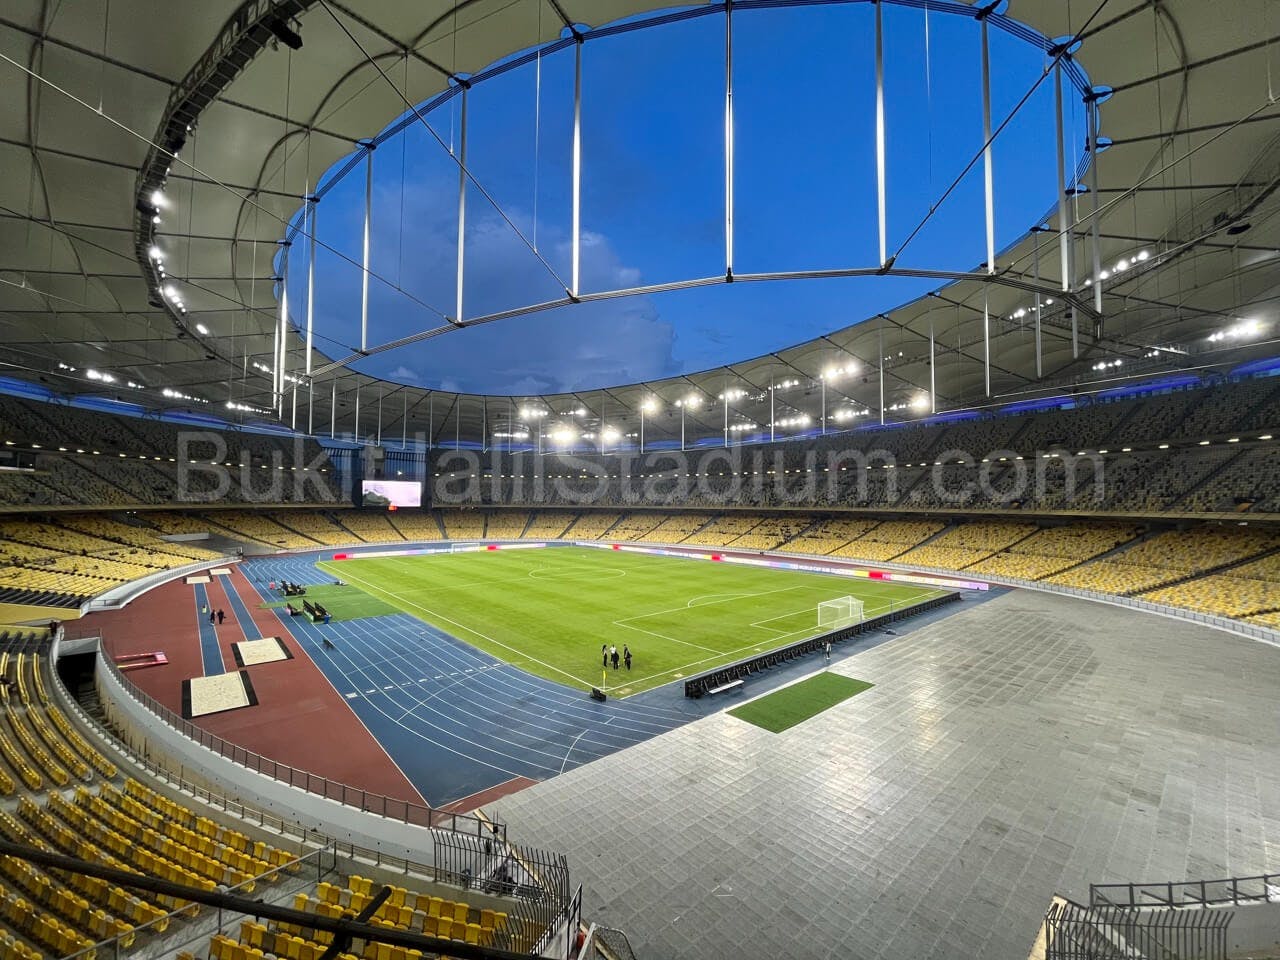 0.5x View of Bukit Jalil field from section 224 of Stadium Bukit Jalil.